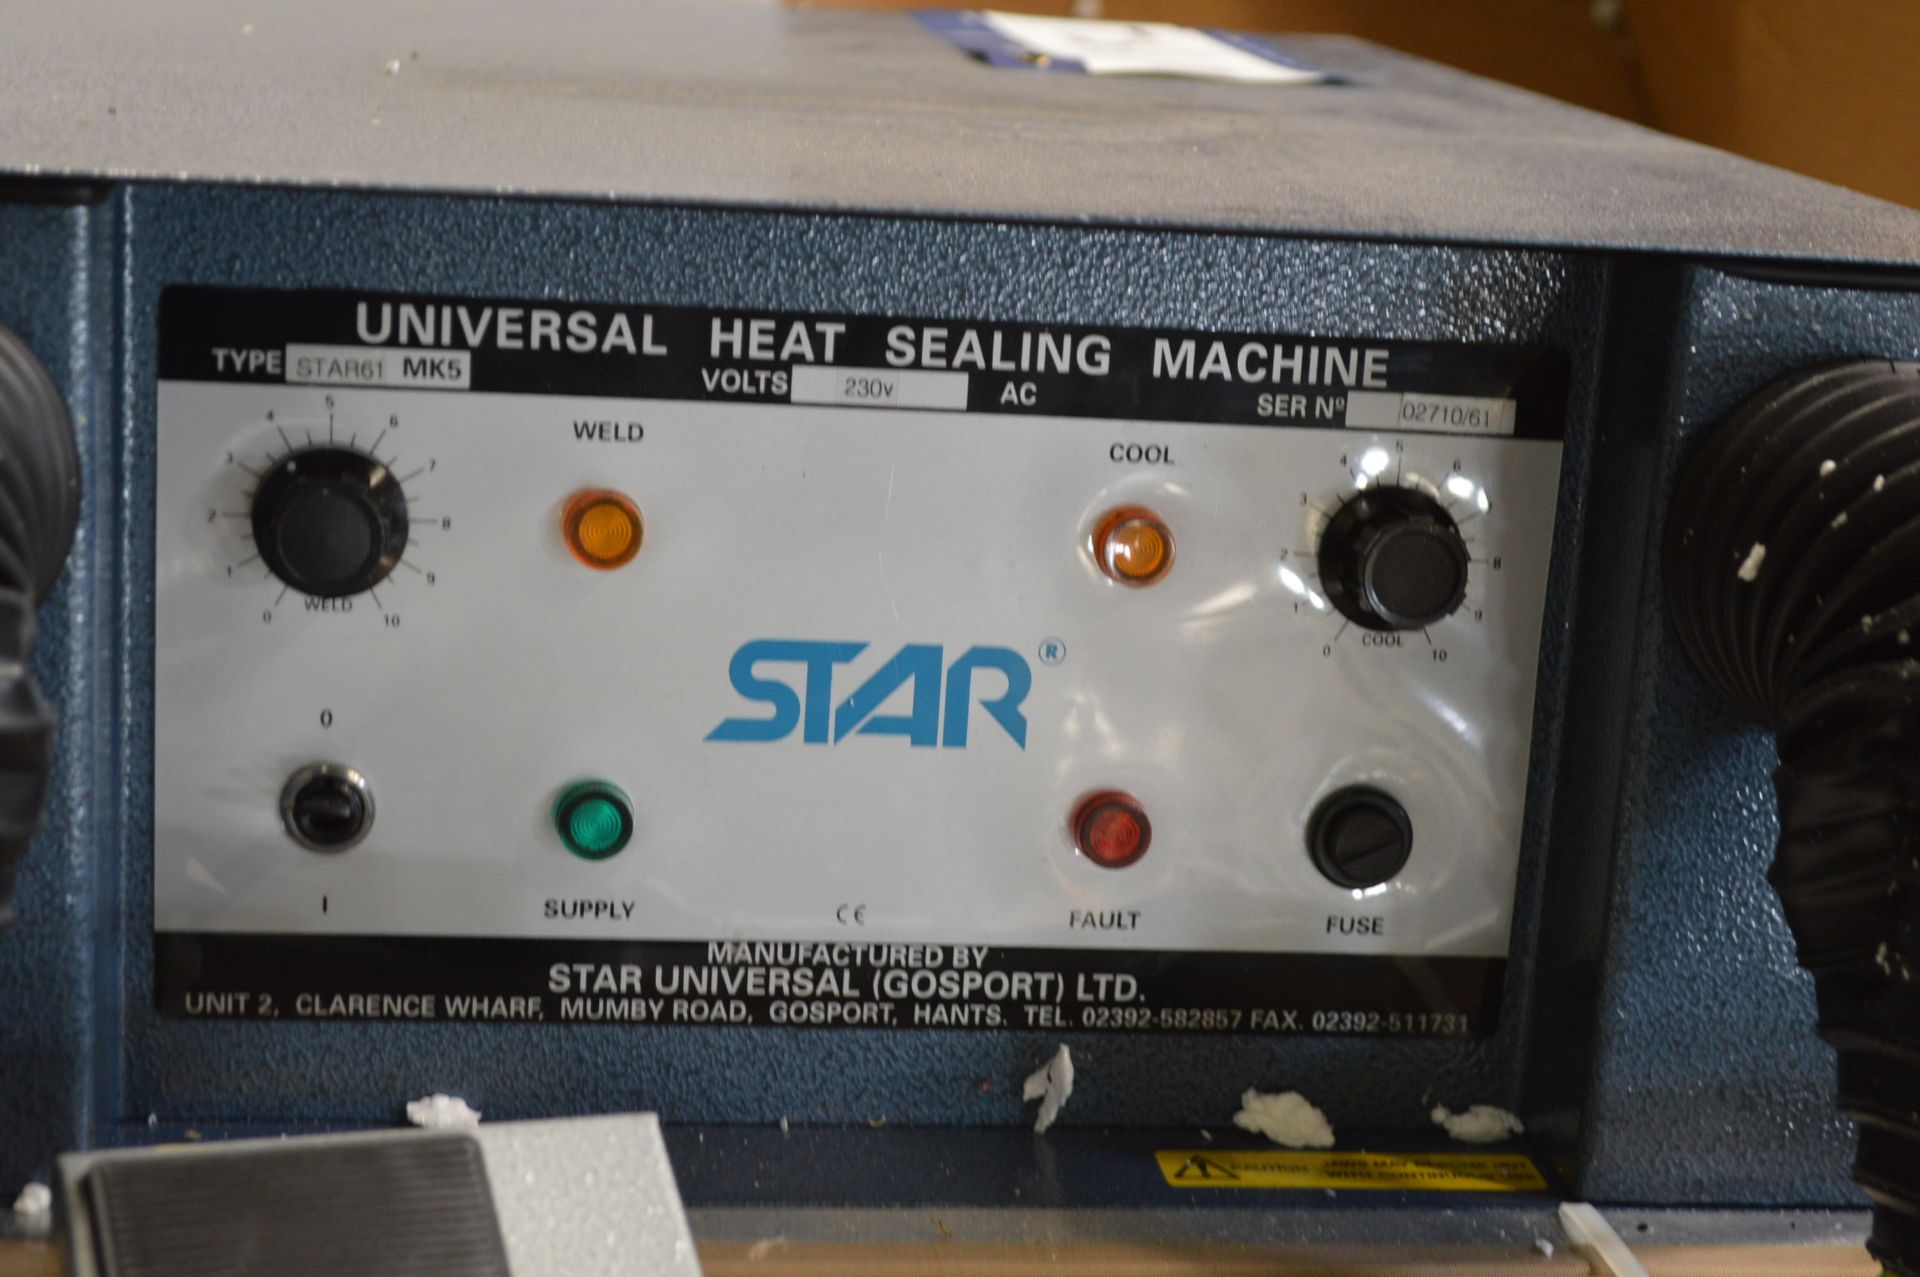 Star STAR61 Universal Heat Sealing Machine, serial no. 02710/61, 230V (unused) (note - this lot is - Image 2 of 2